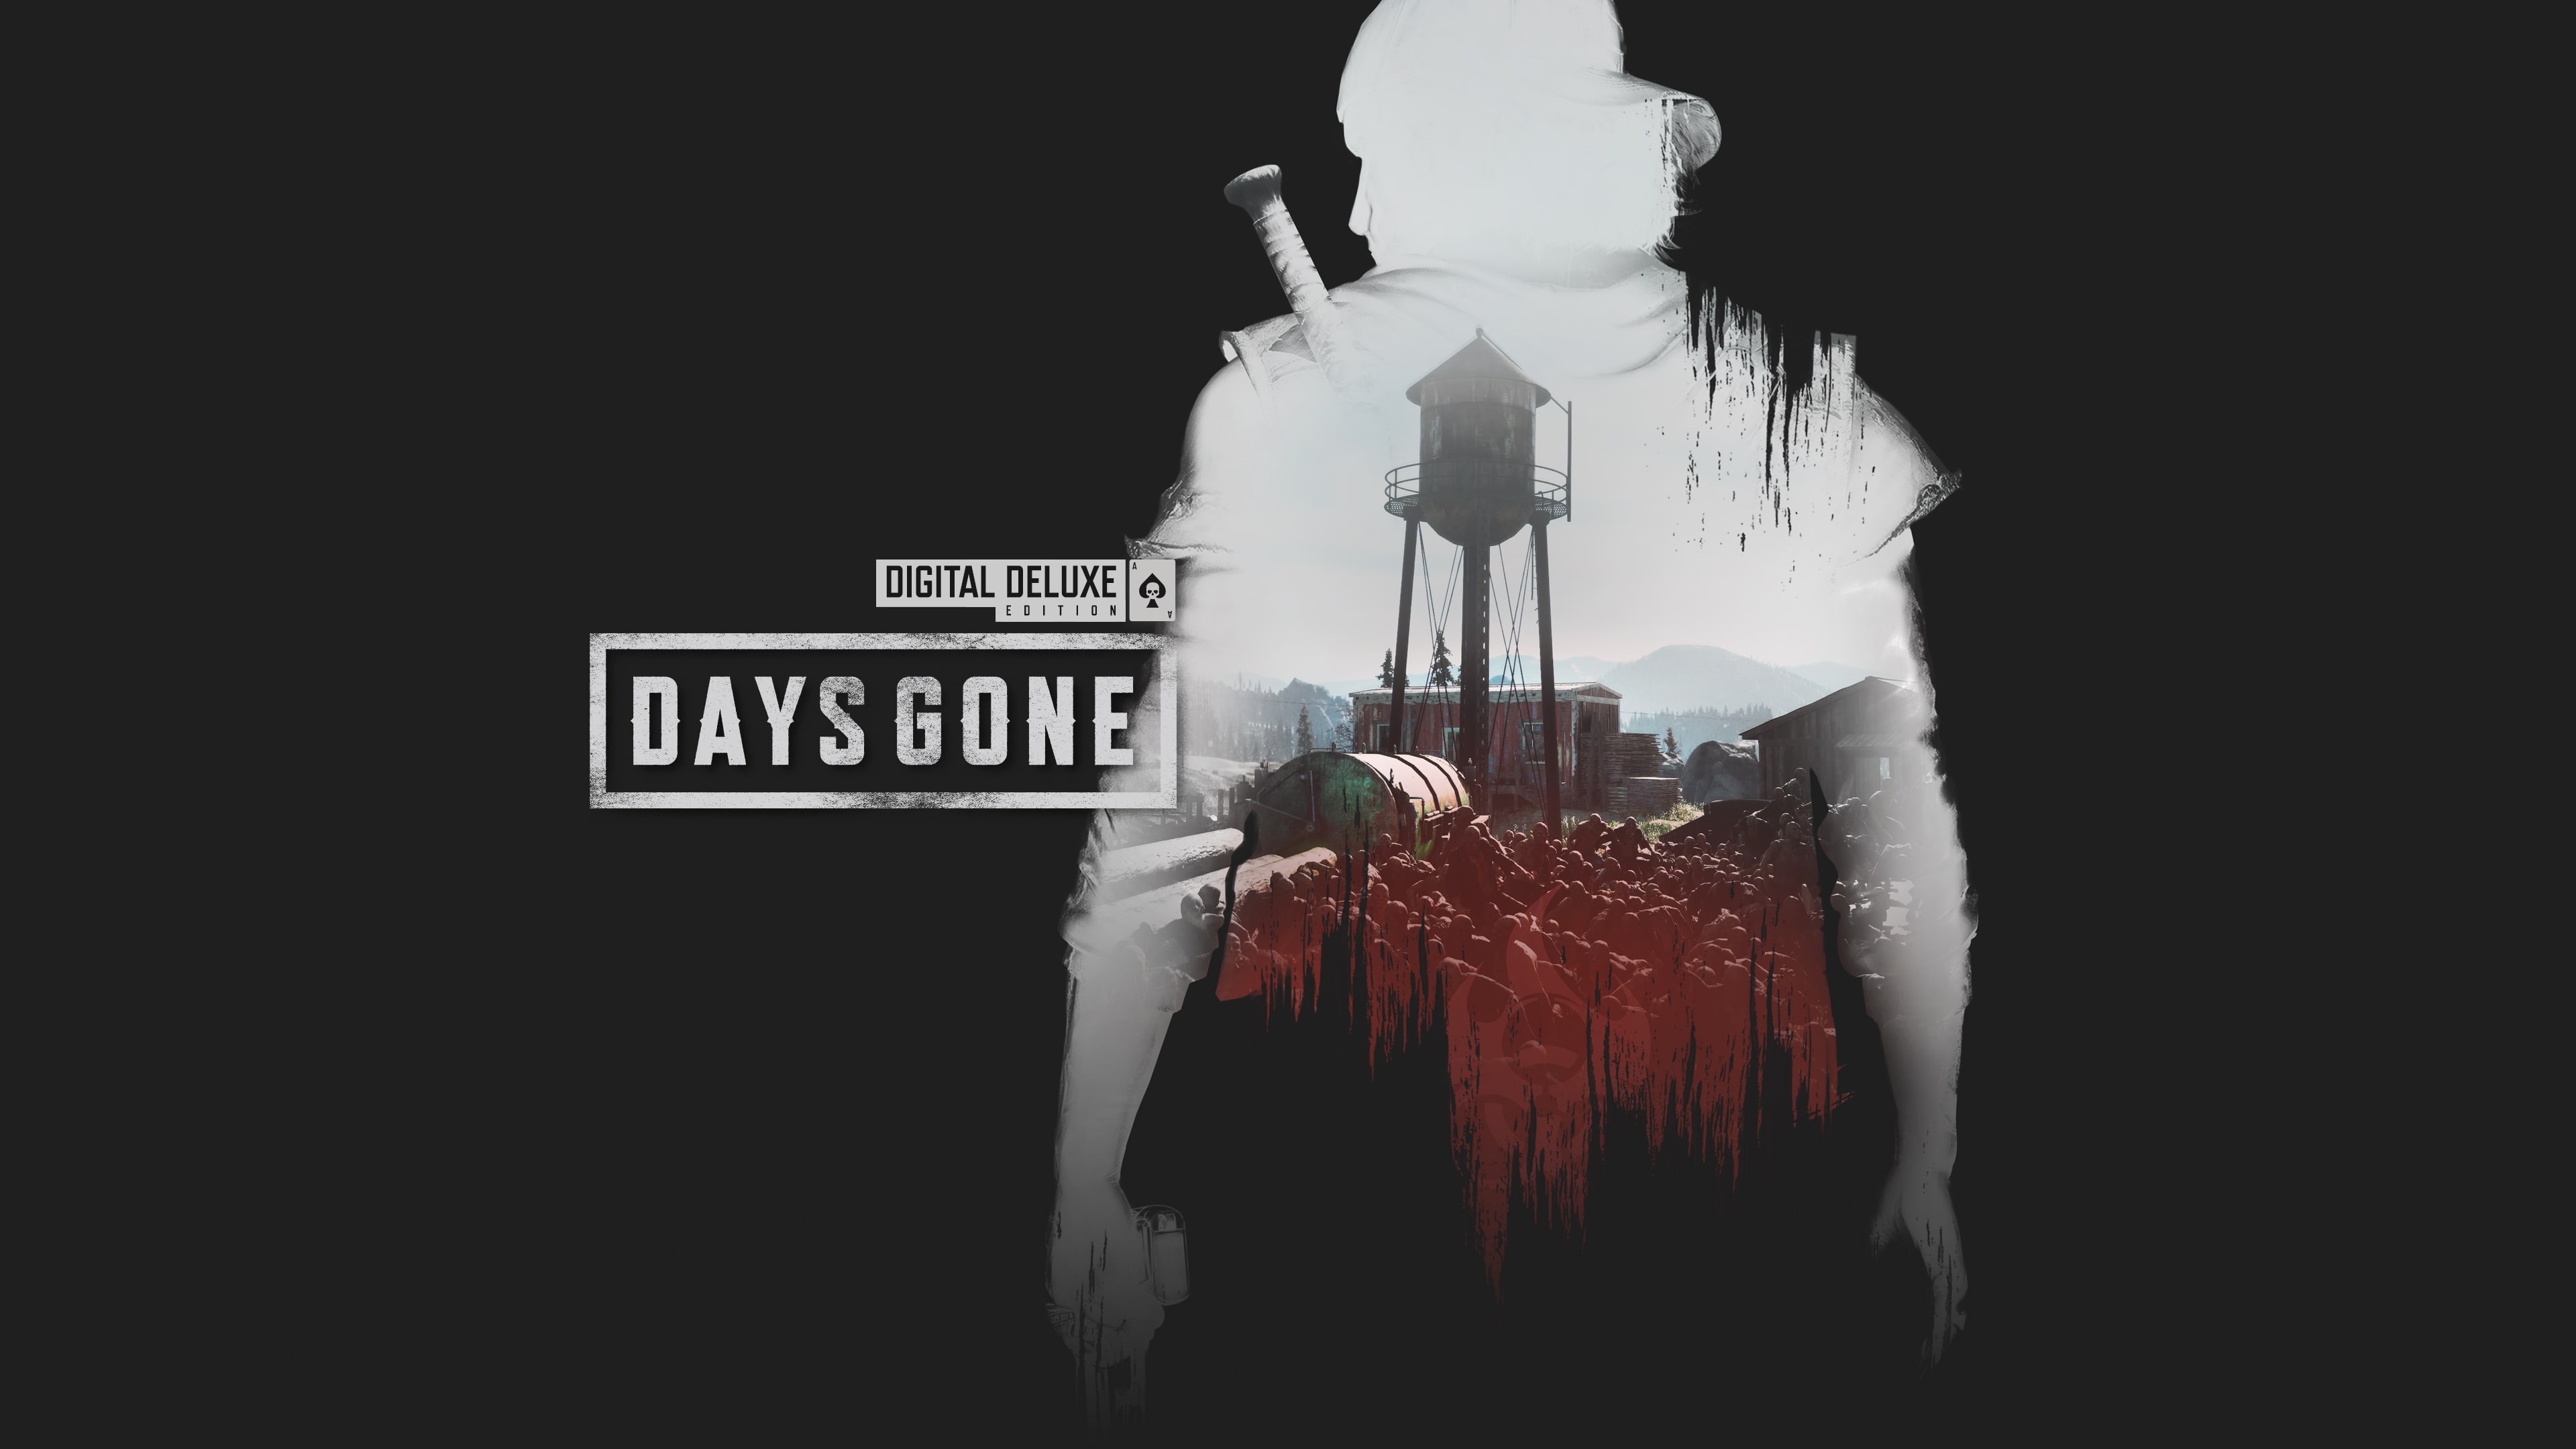 Days Gone Digital Deluxe Edition (English, Korean, Traditional Chinese)